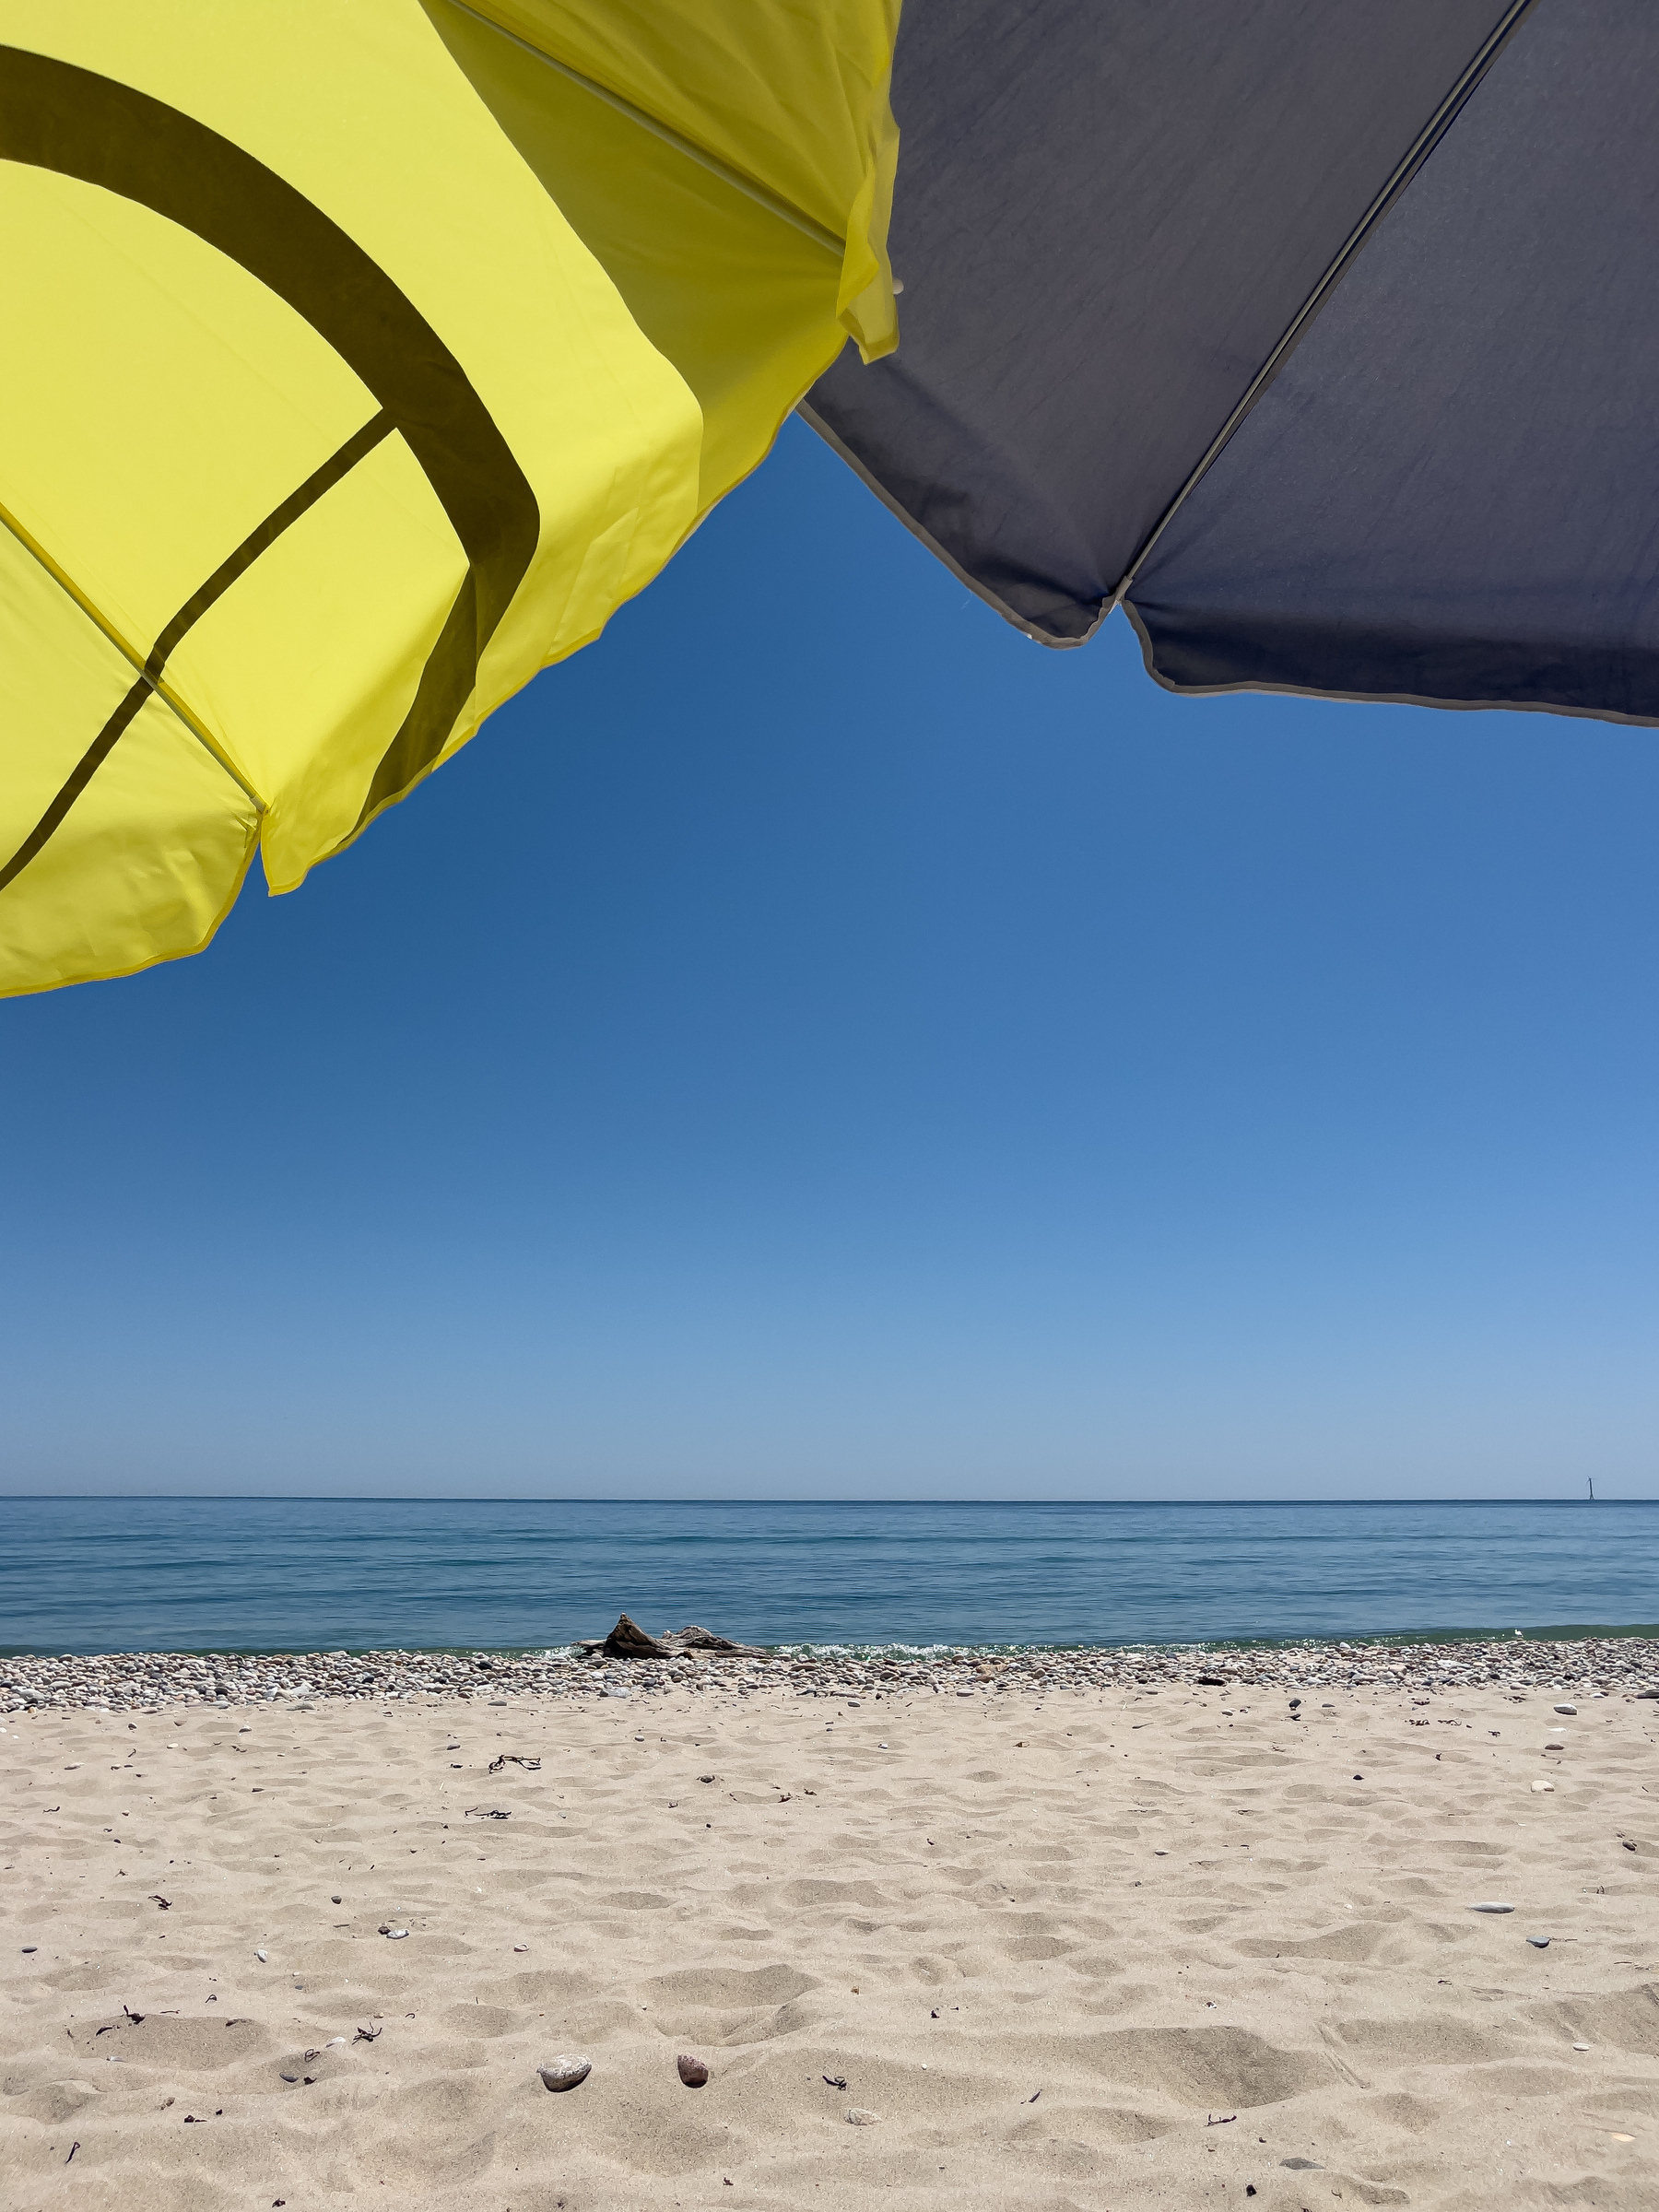 Ocean and beach with partial yellow and blue umbrellas at the top of the frame.